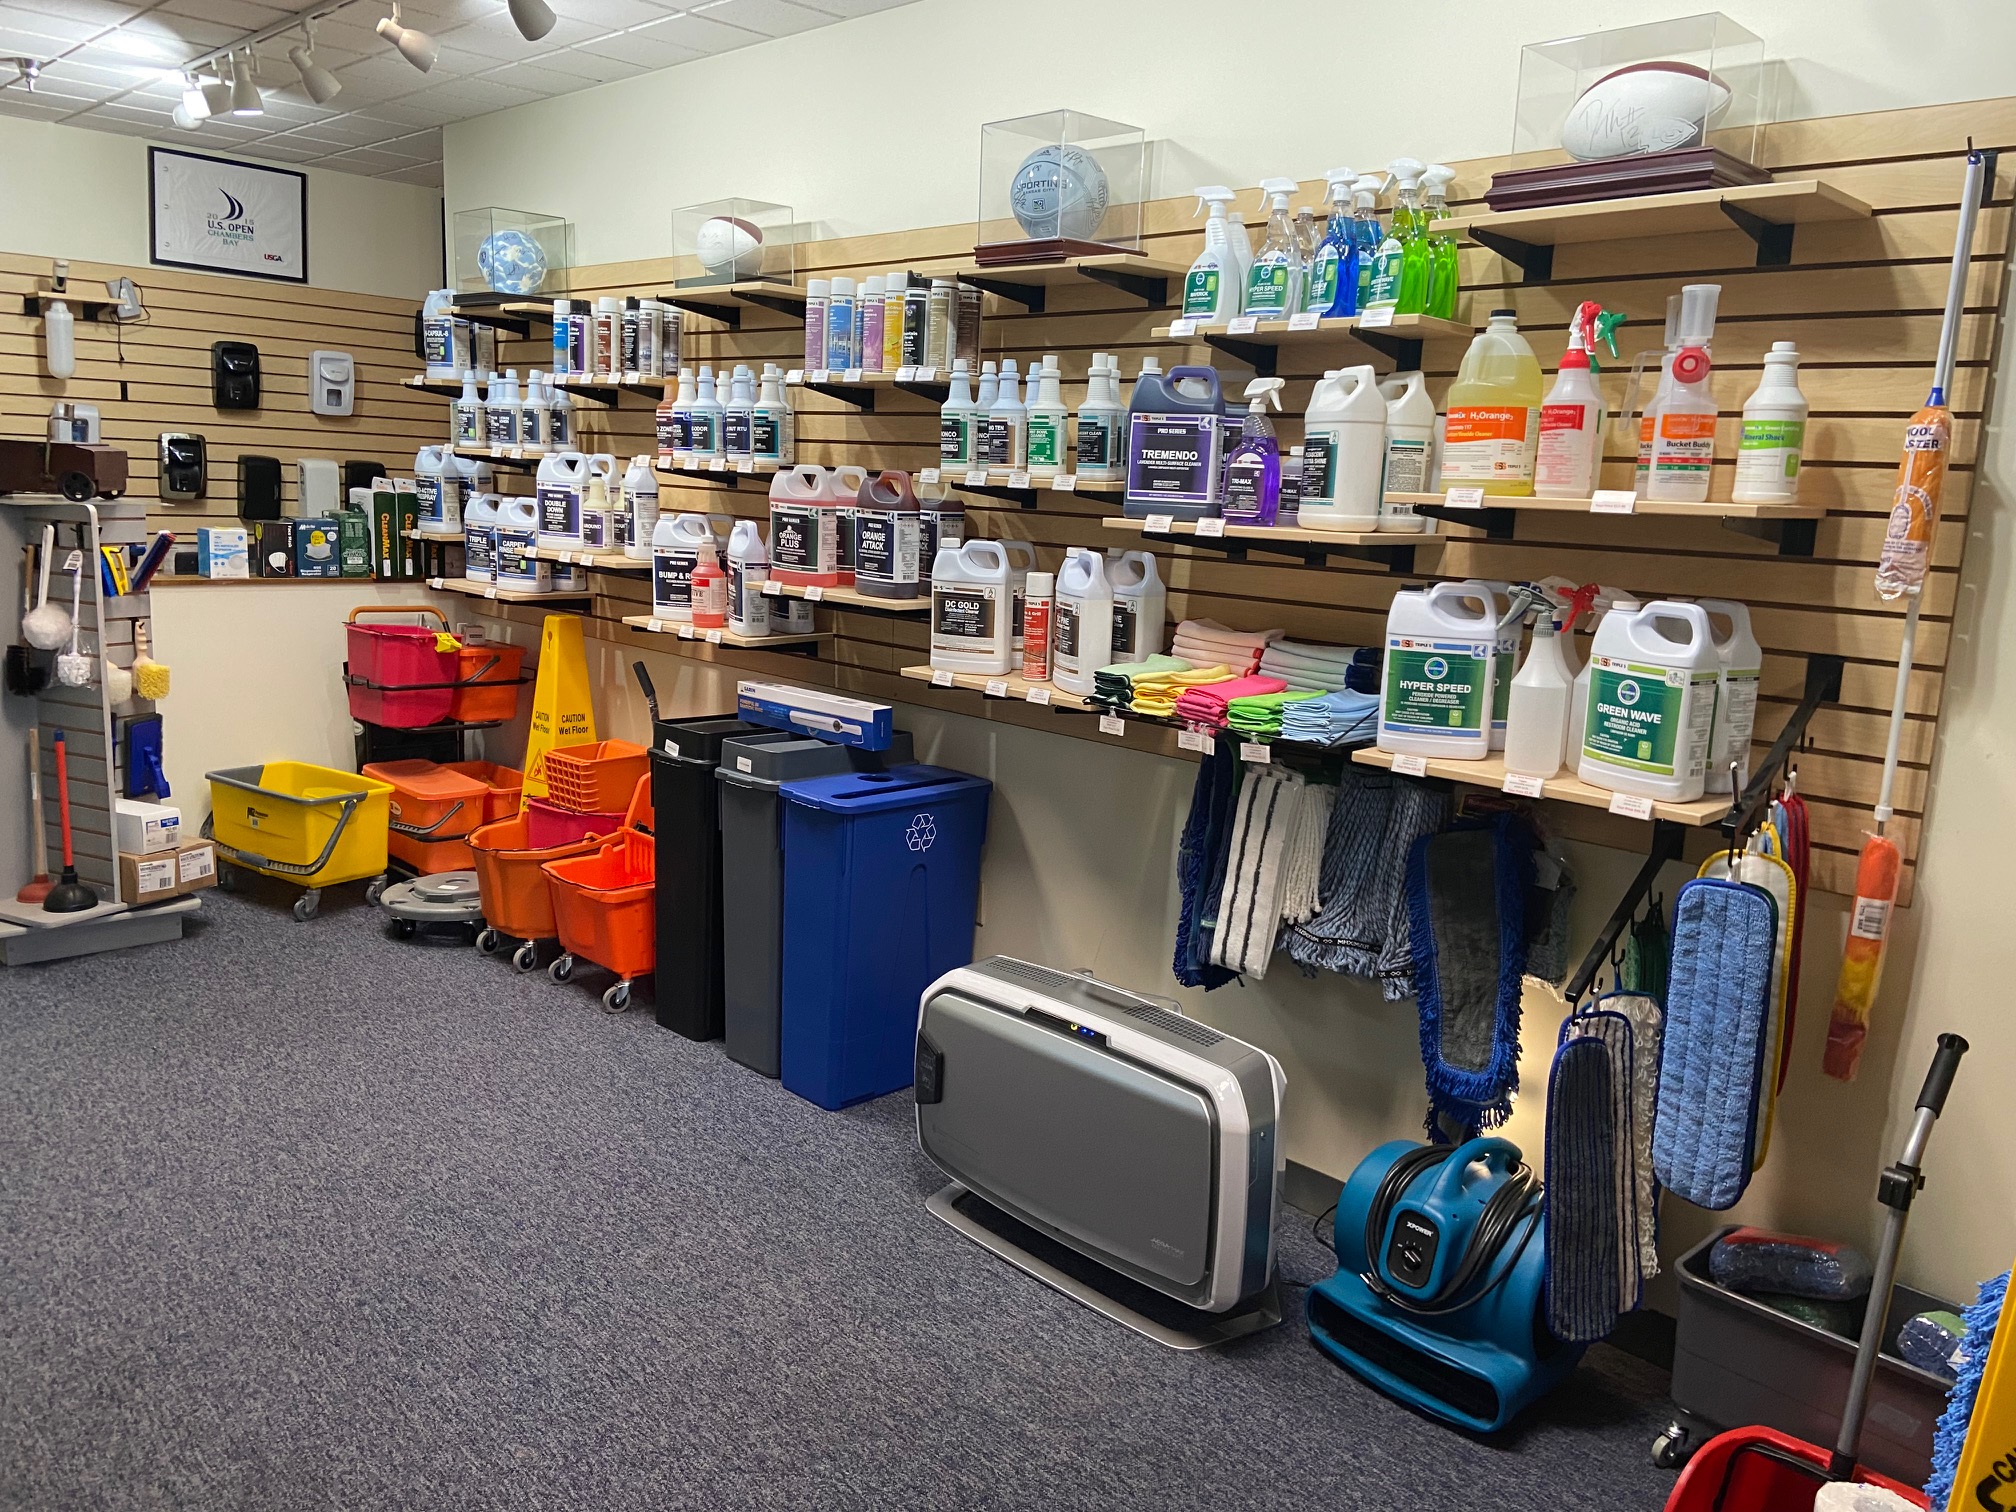 Janitorial Supplies: Facility Cleaning Supplies & More for the Office